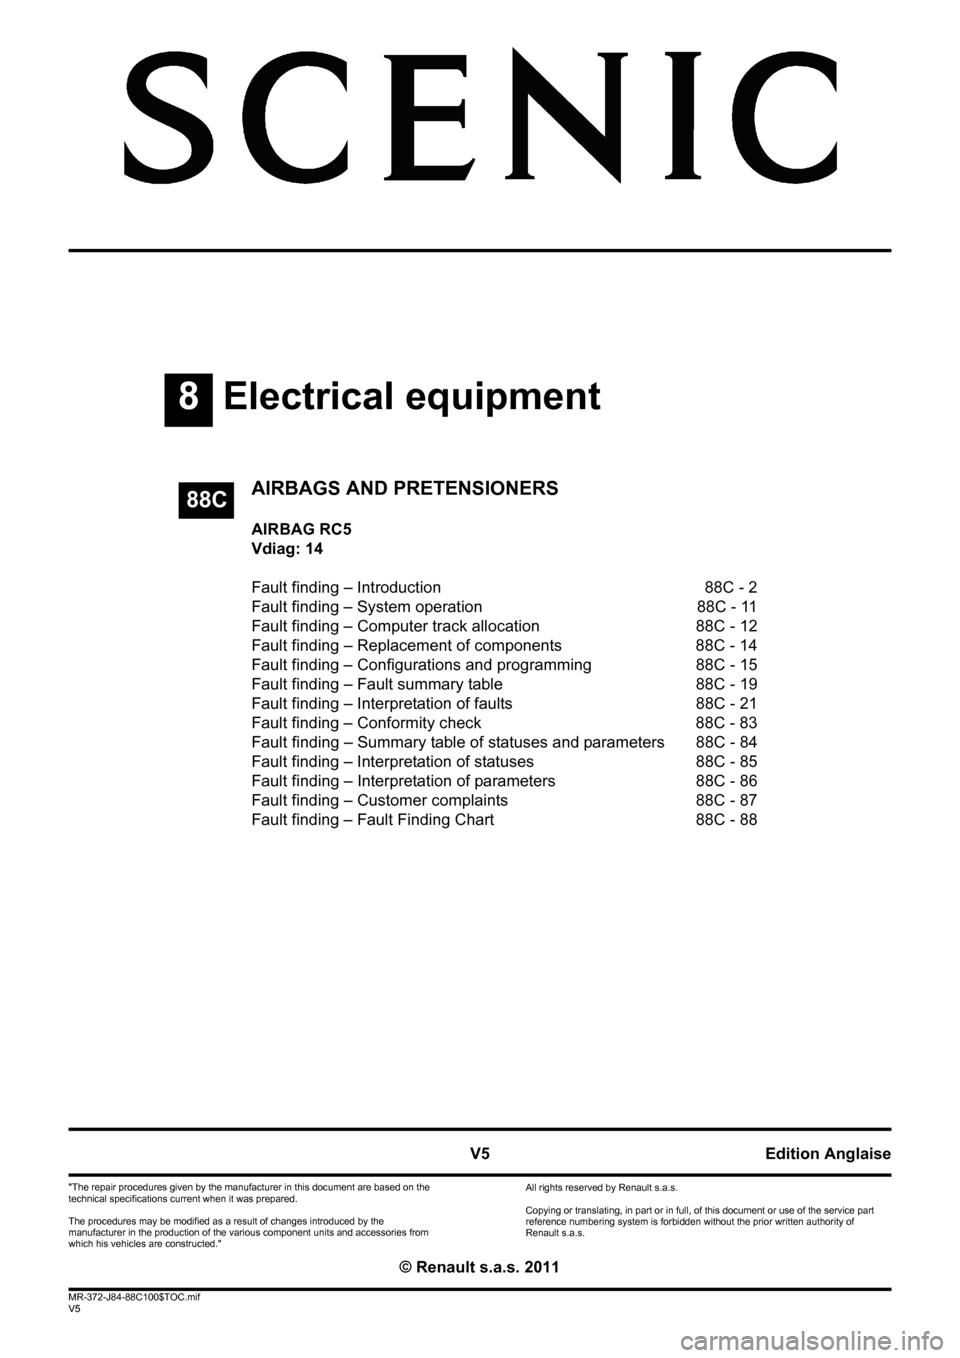 RENAULT SCENIC 2011 J95 / 3.G Air Bag RC5 - Seat Belt Pretensioners Workshop Manual 8Electrical equipment
V5 MR-372-J84-88C100$TOC.mif
V5
88C
"The repair procedures given by the manufacturer in this document are based on the 
technical specifications current when it was prepared.
The